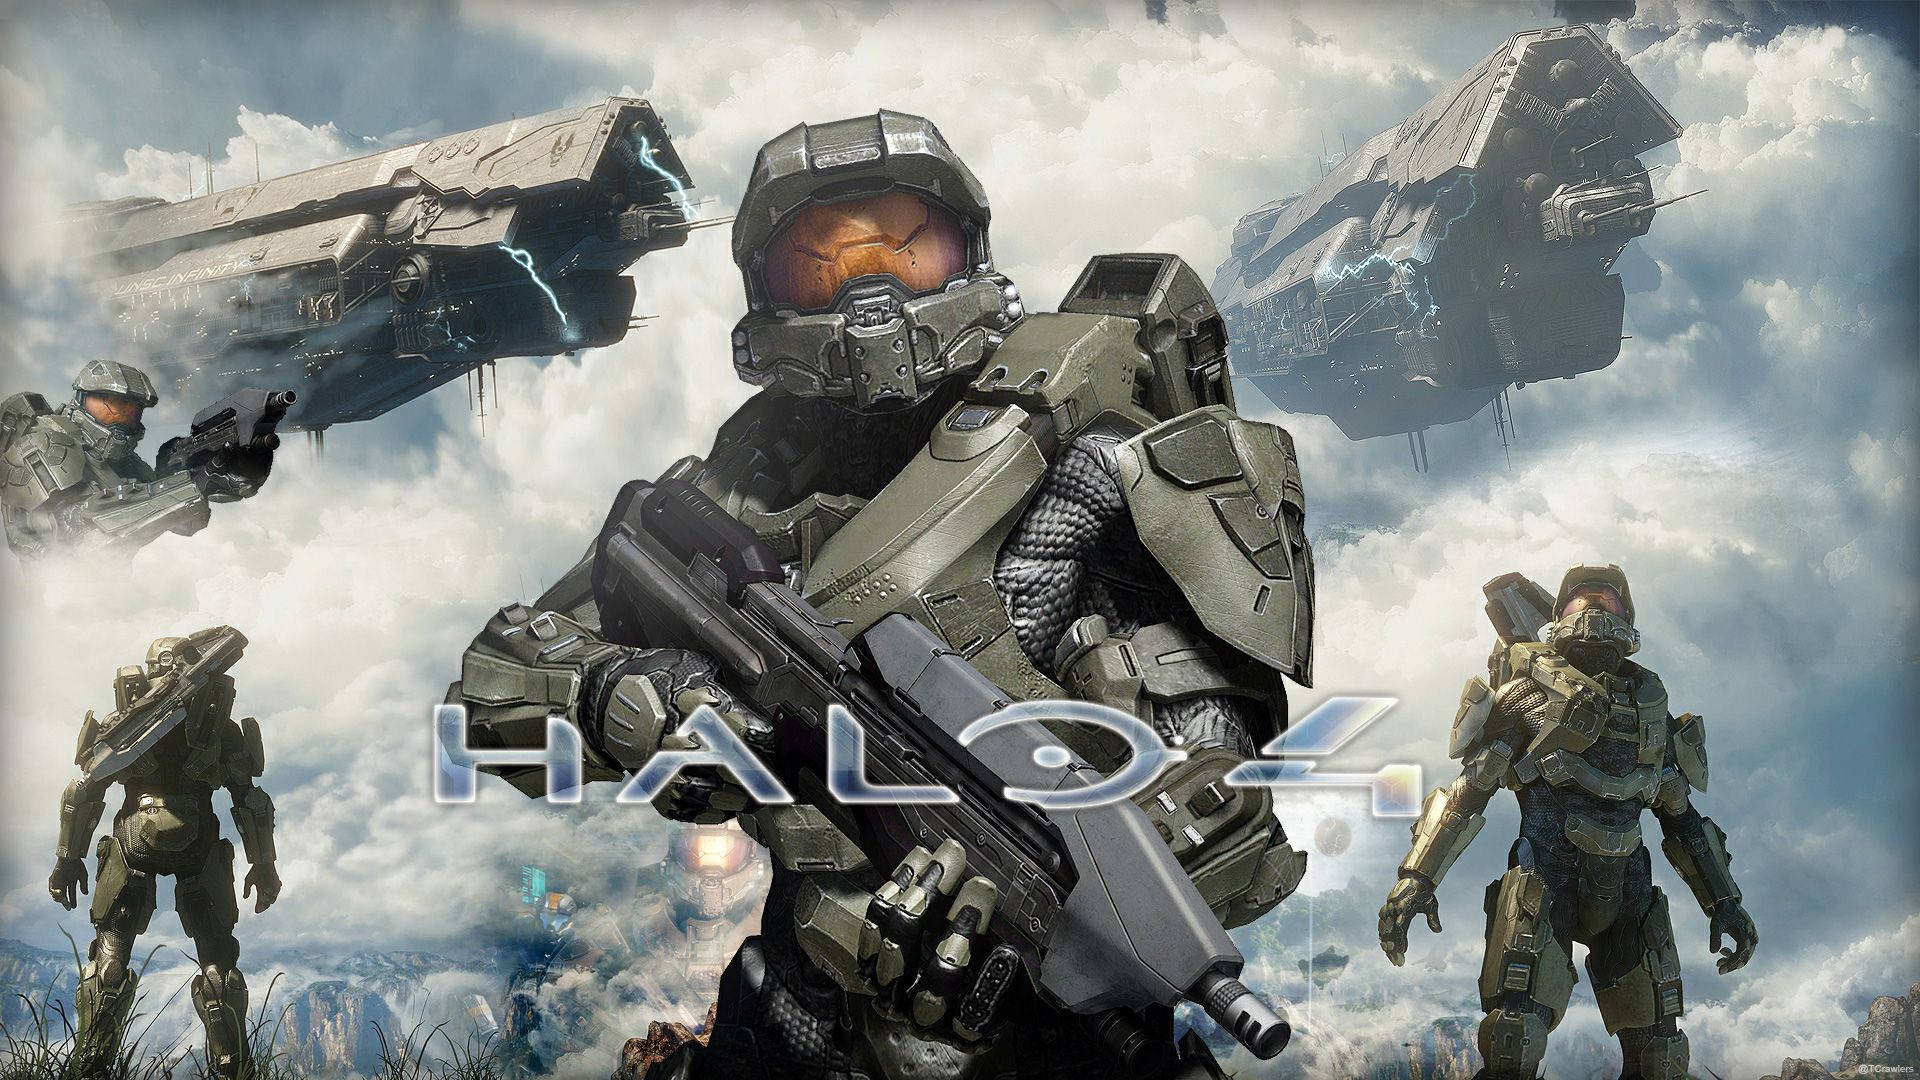 Free Halo Wallpaper Downloads, [200+] Halo Wallpapers for FREE | Wallpapers .com